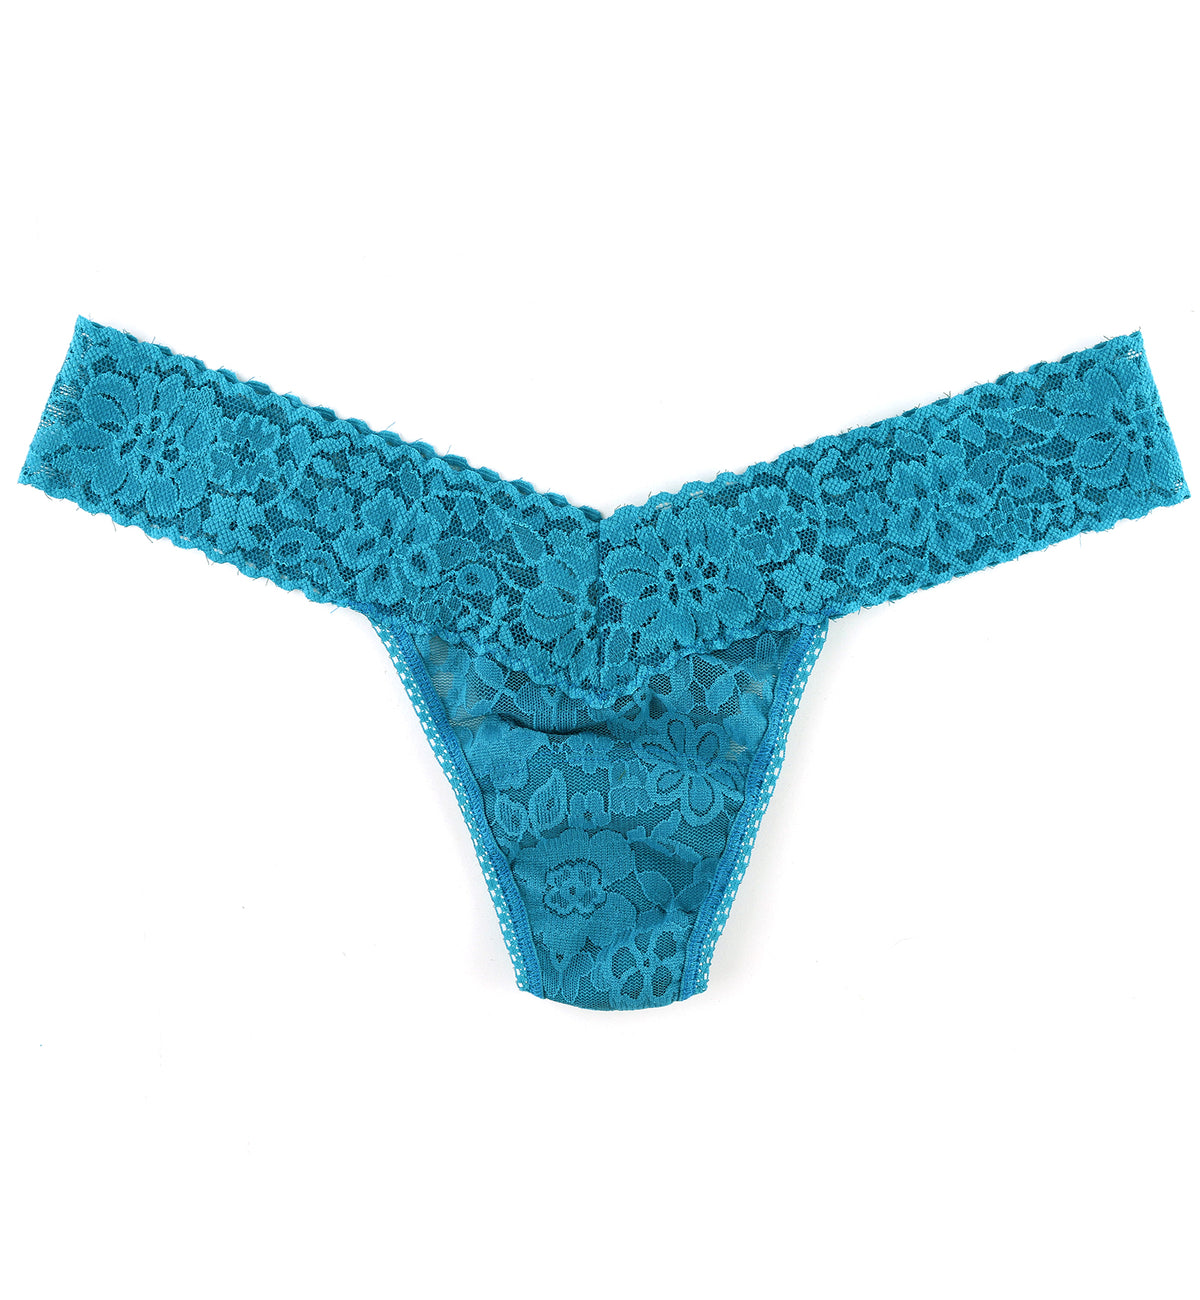 Hanky Panky Daily Lace Low Rise Thong (771001P),Tidal Teal - Tidal Teal,One Size